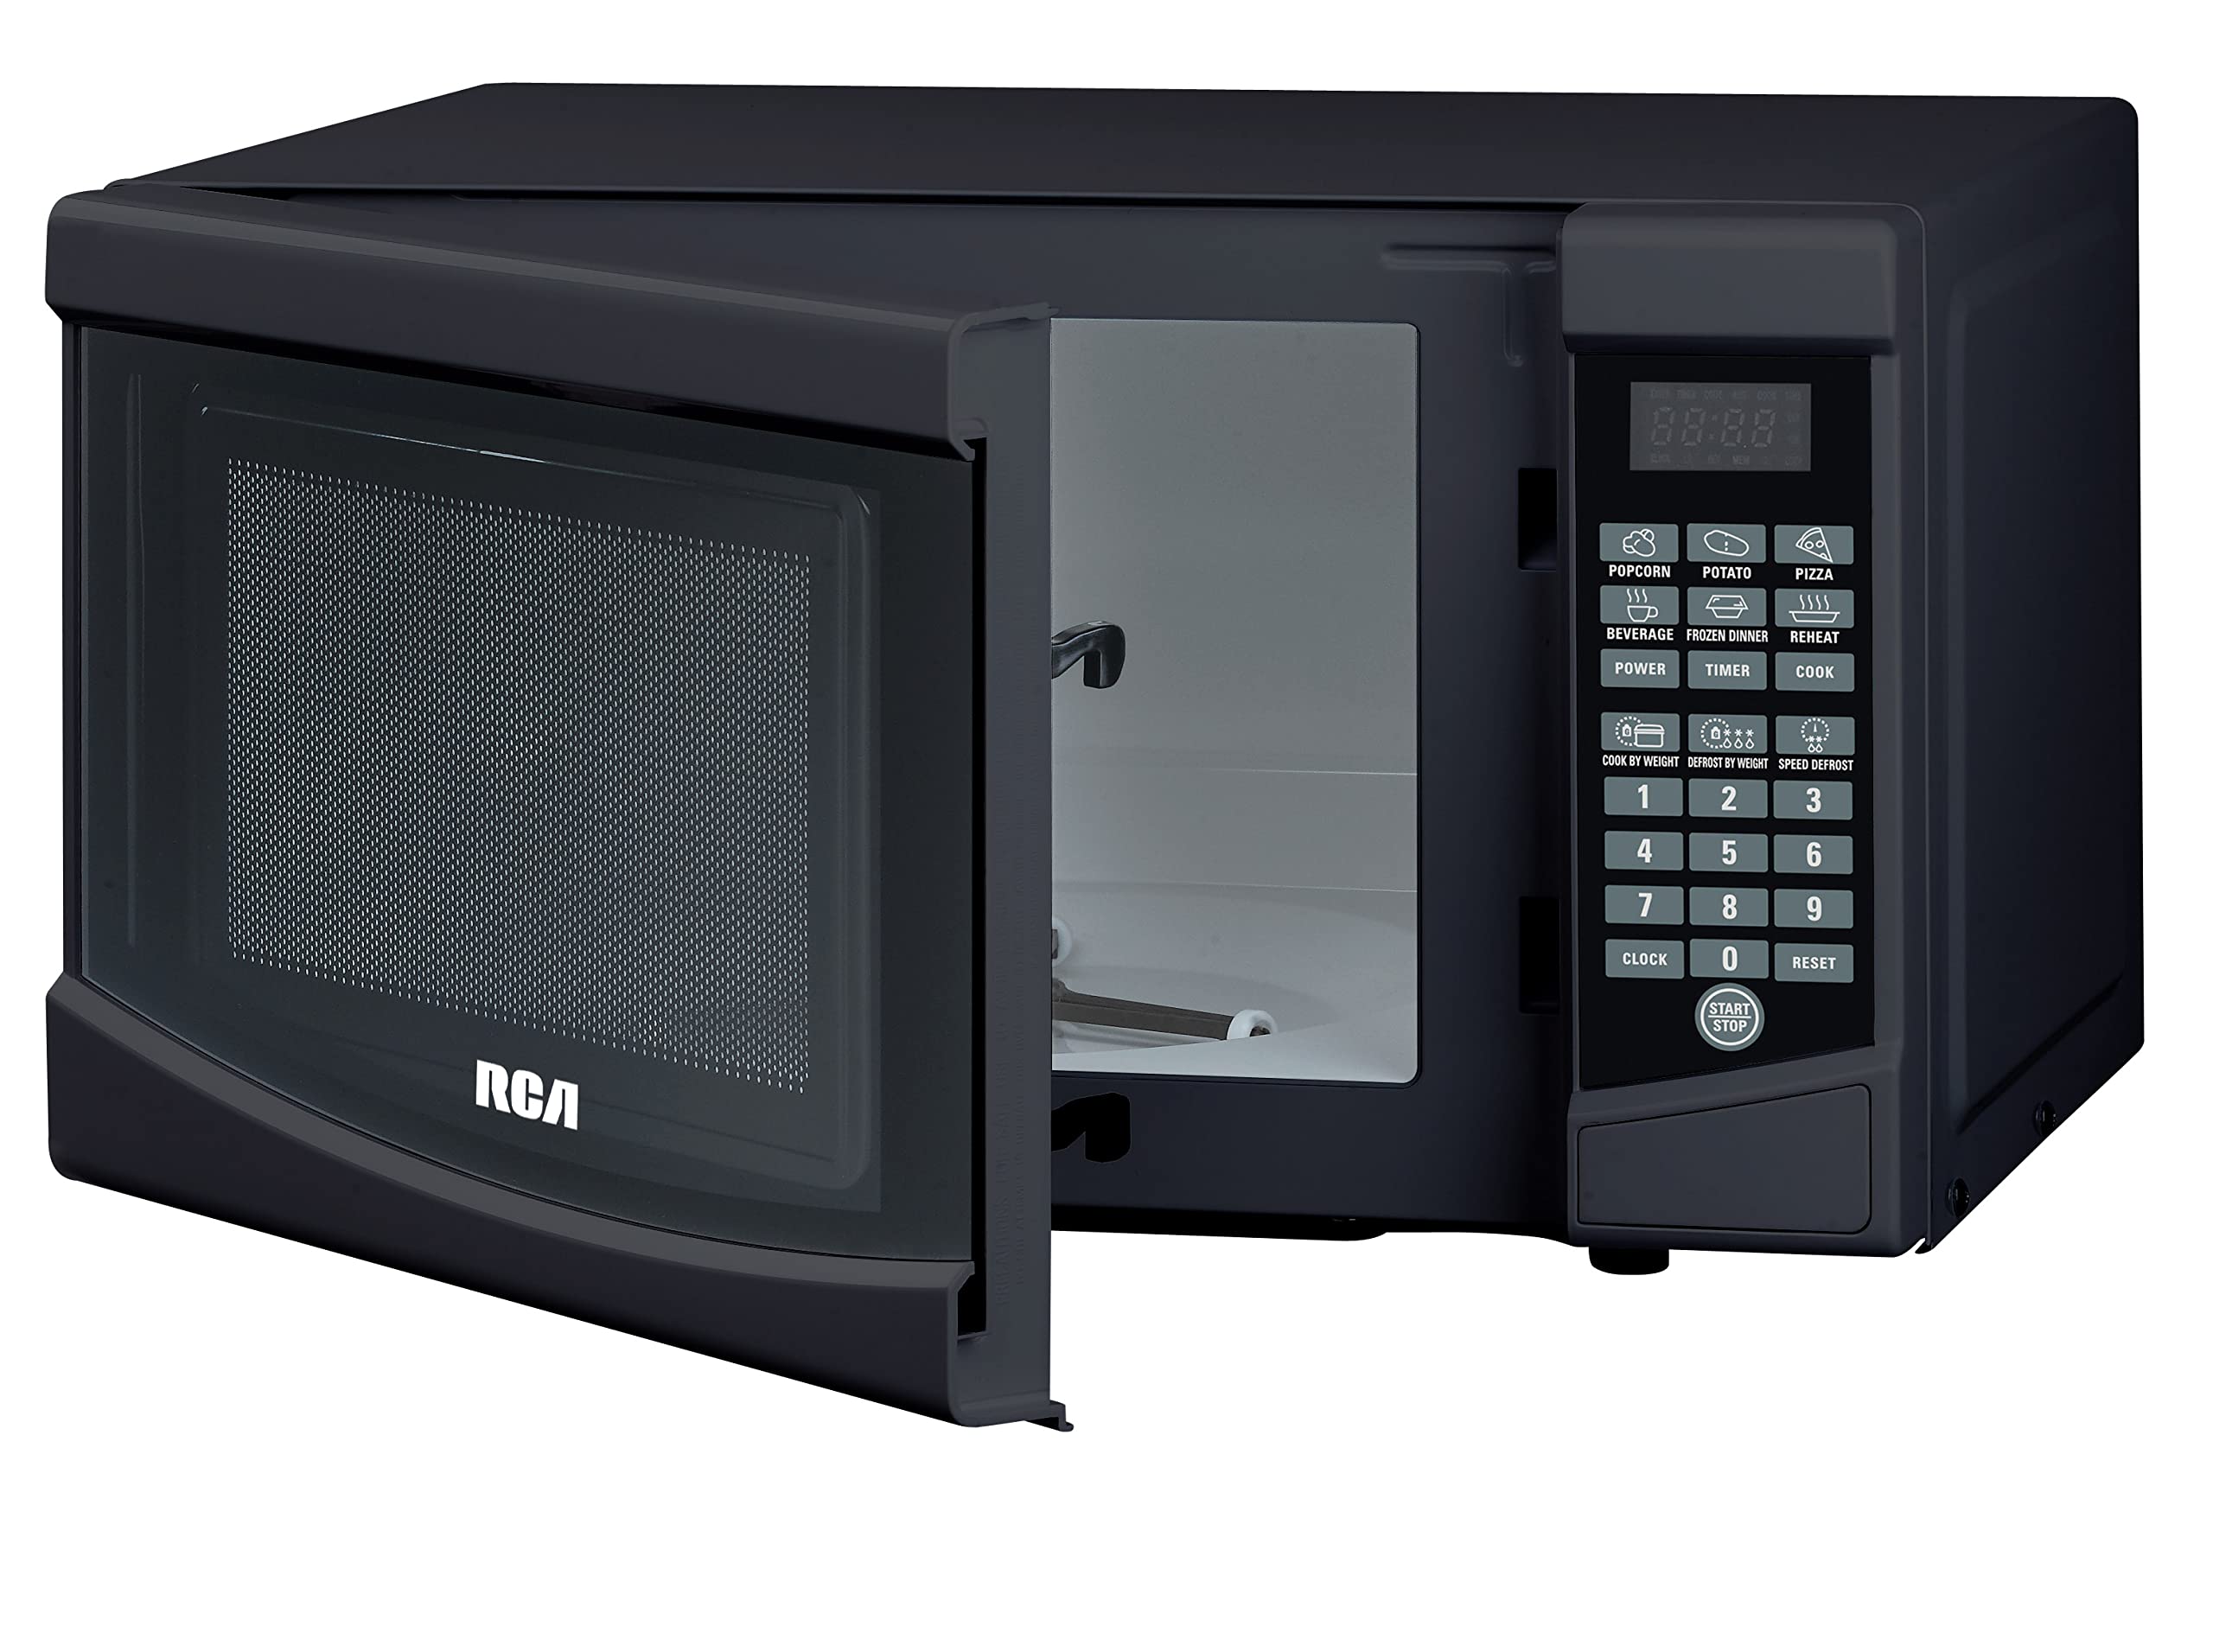 RCA 0.7 Cu. Ft. Microwave Oven - Small Microwave Oven Compact Microwave Ovens for Small Spaces, Countertop, Apartment 700 Watt Microwave - Black